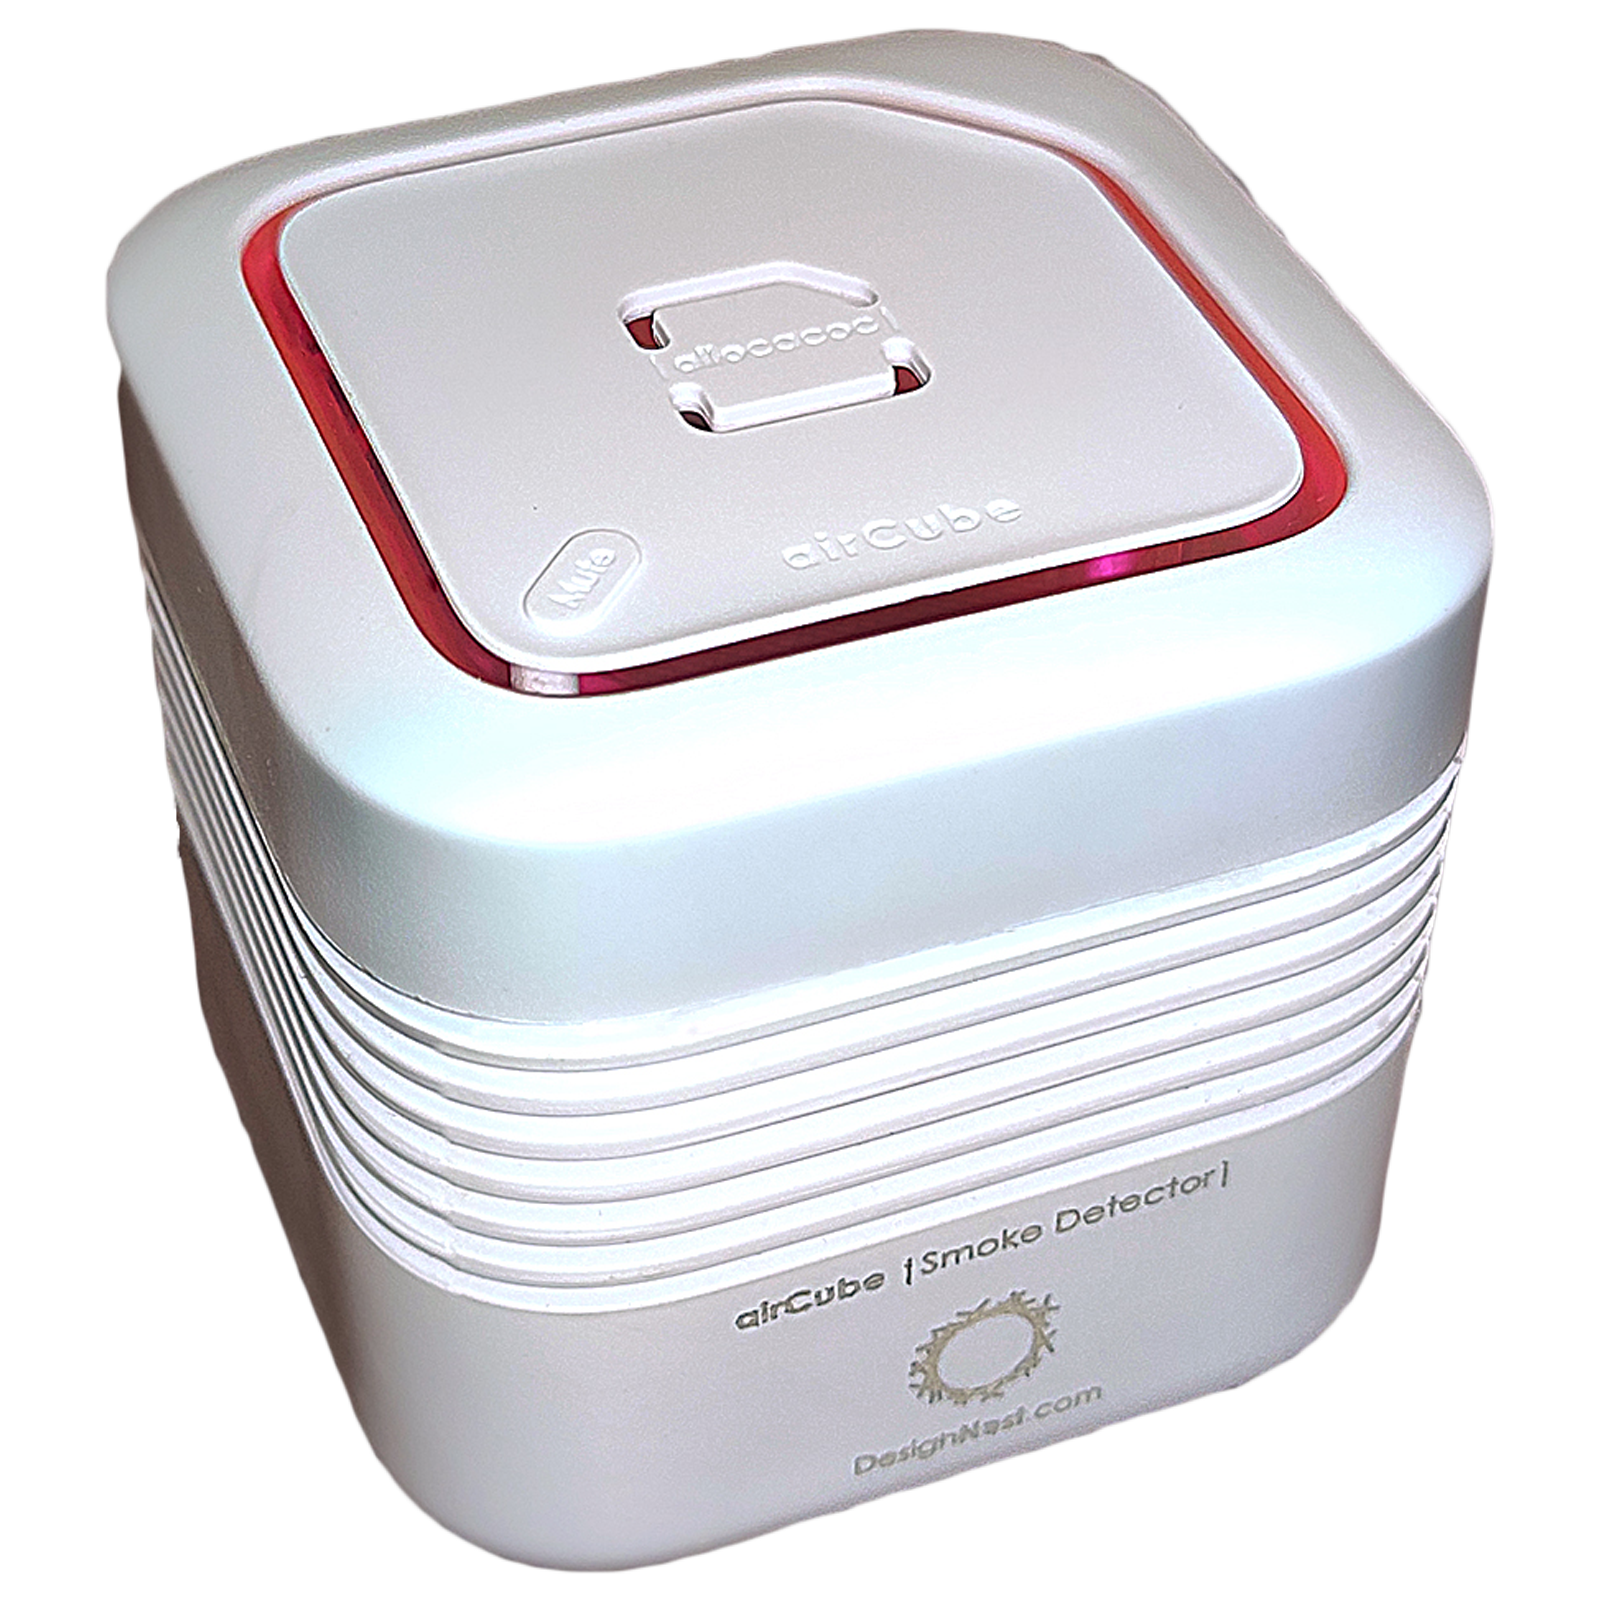 DesignNest AirCube Fire Alarm (85 dB, Low Battery Warning, 11150WT/ACSMDE, White)